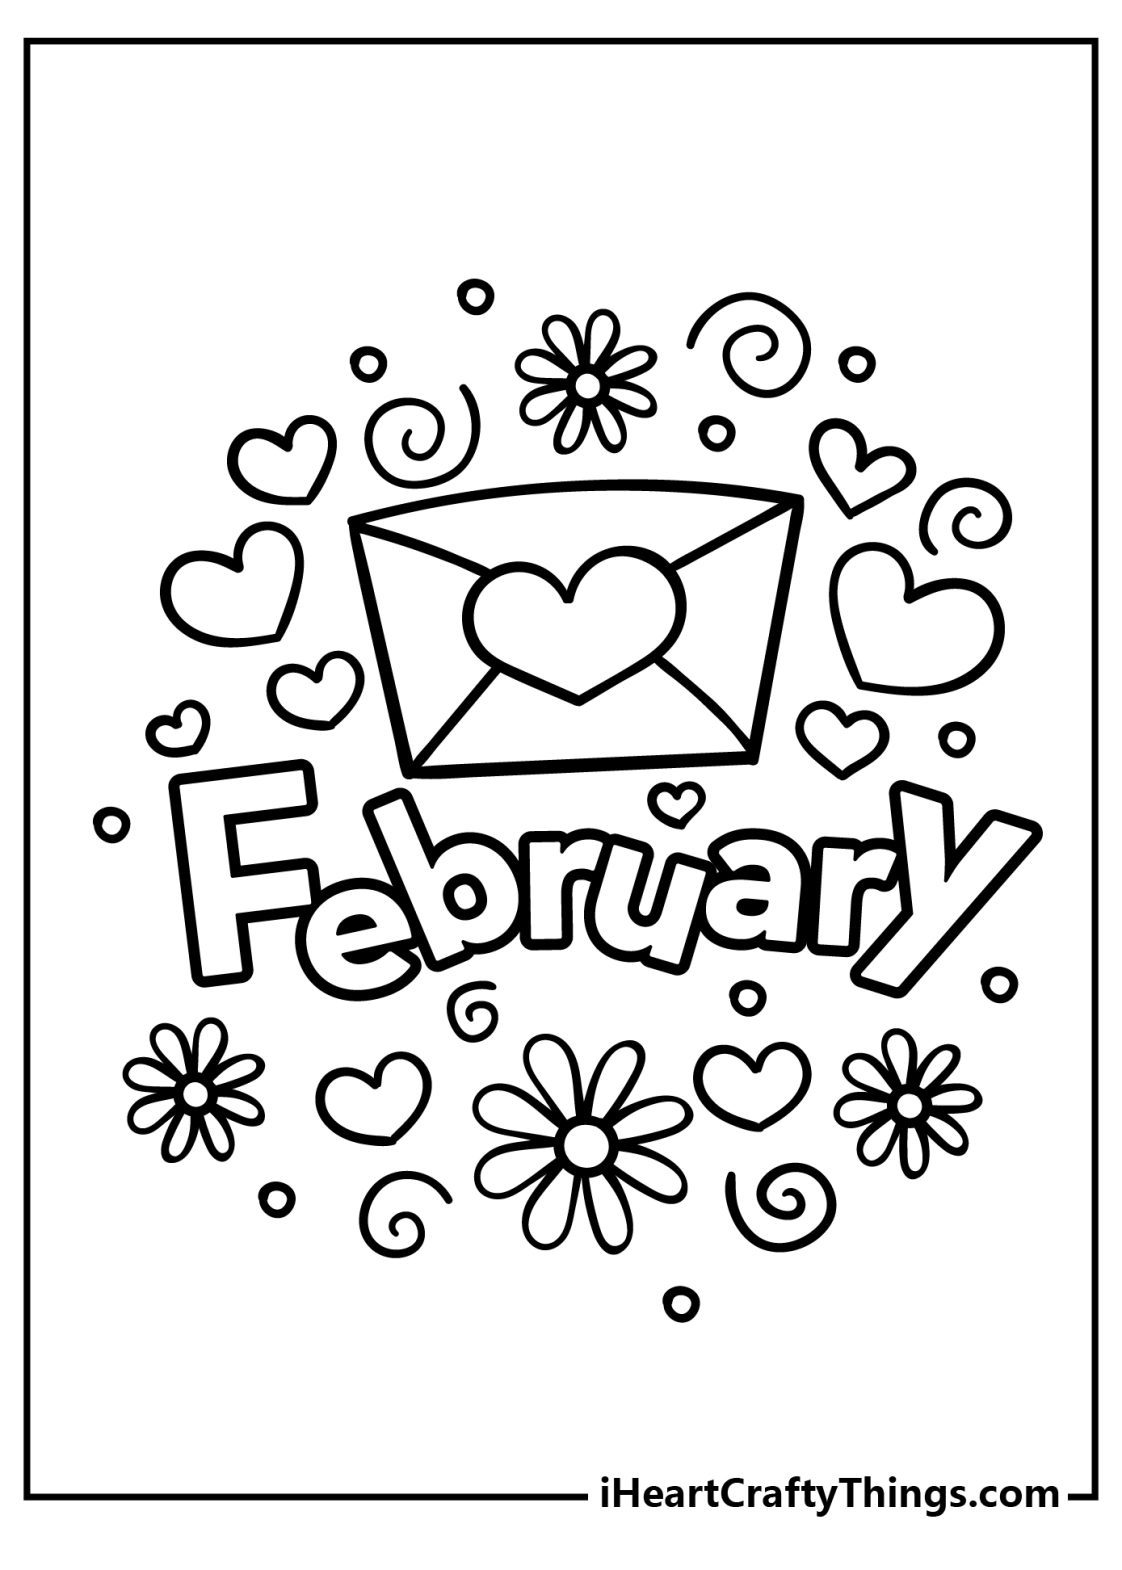 February Coloring Pages (100% Free Printables)